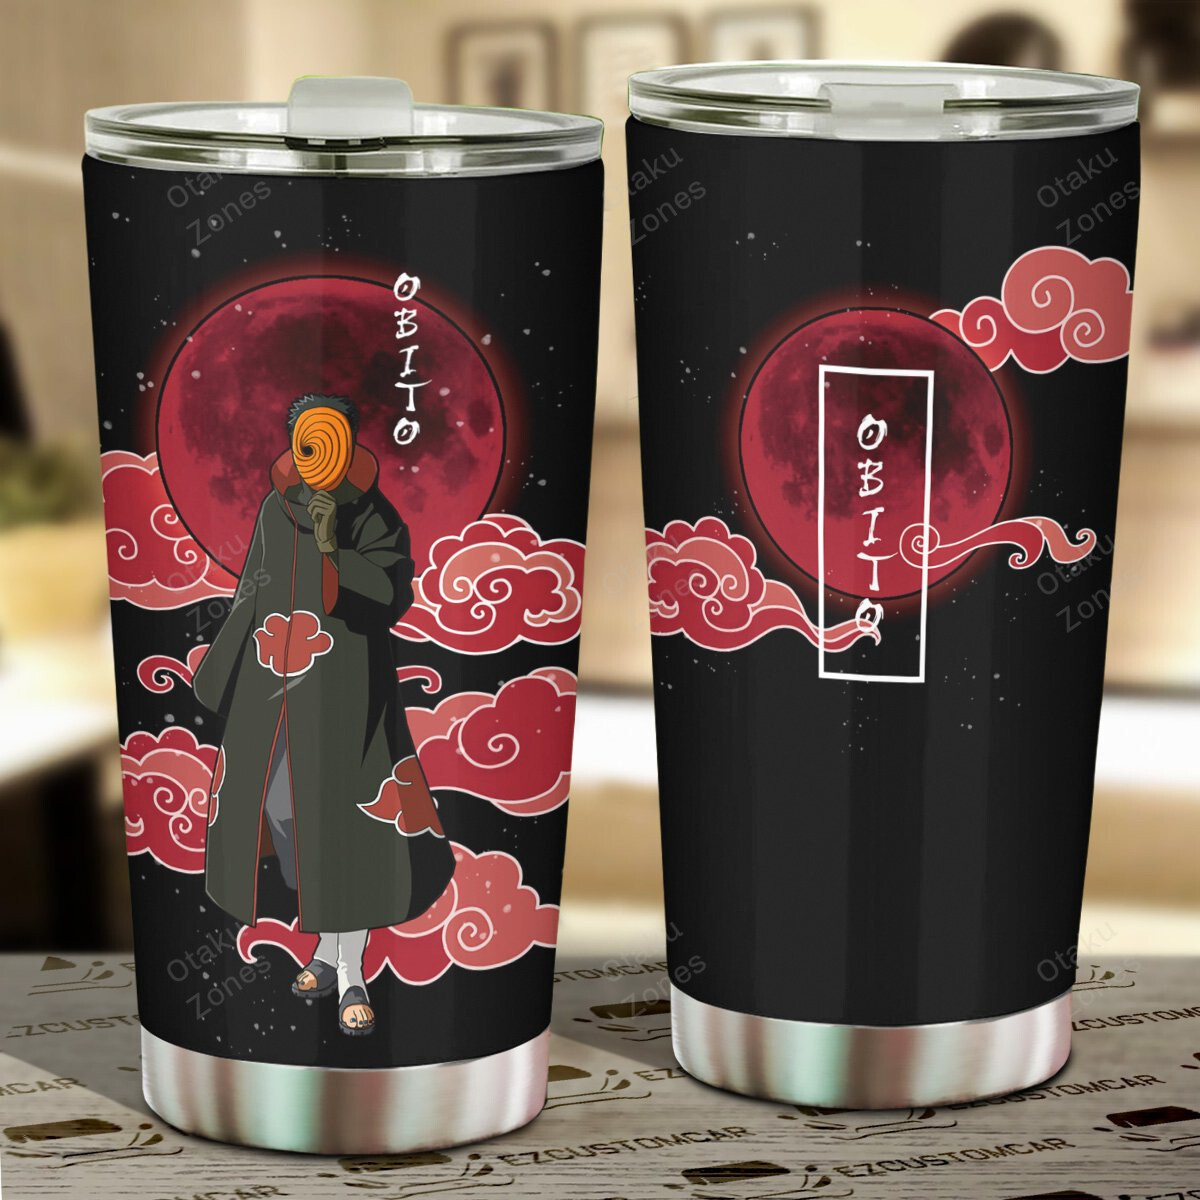 Go ahead and order your new tumbler now! 46